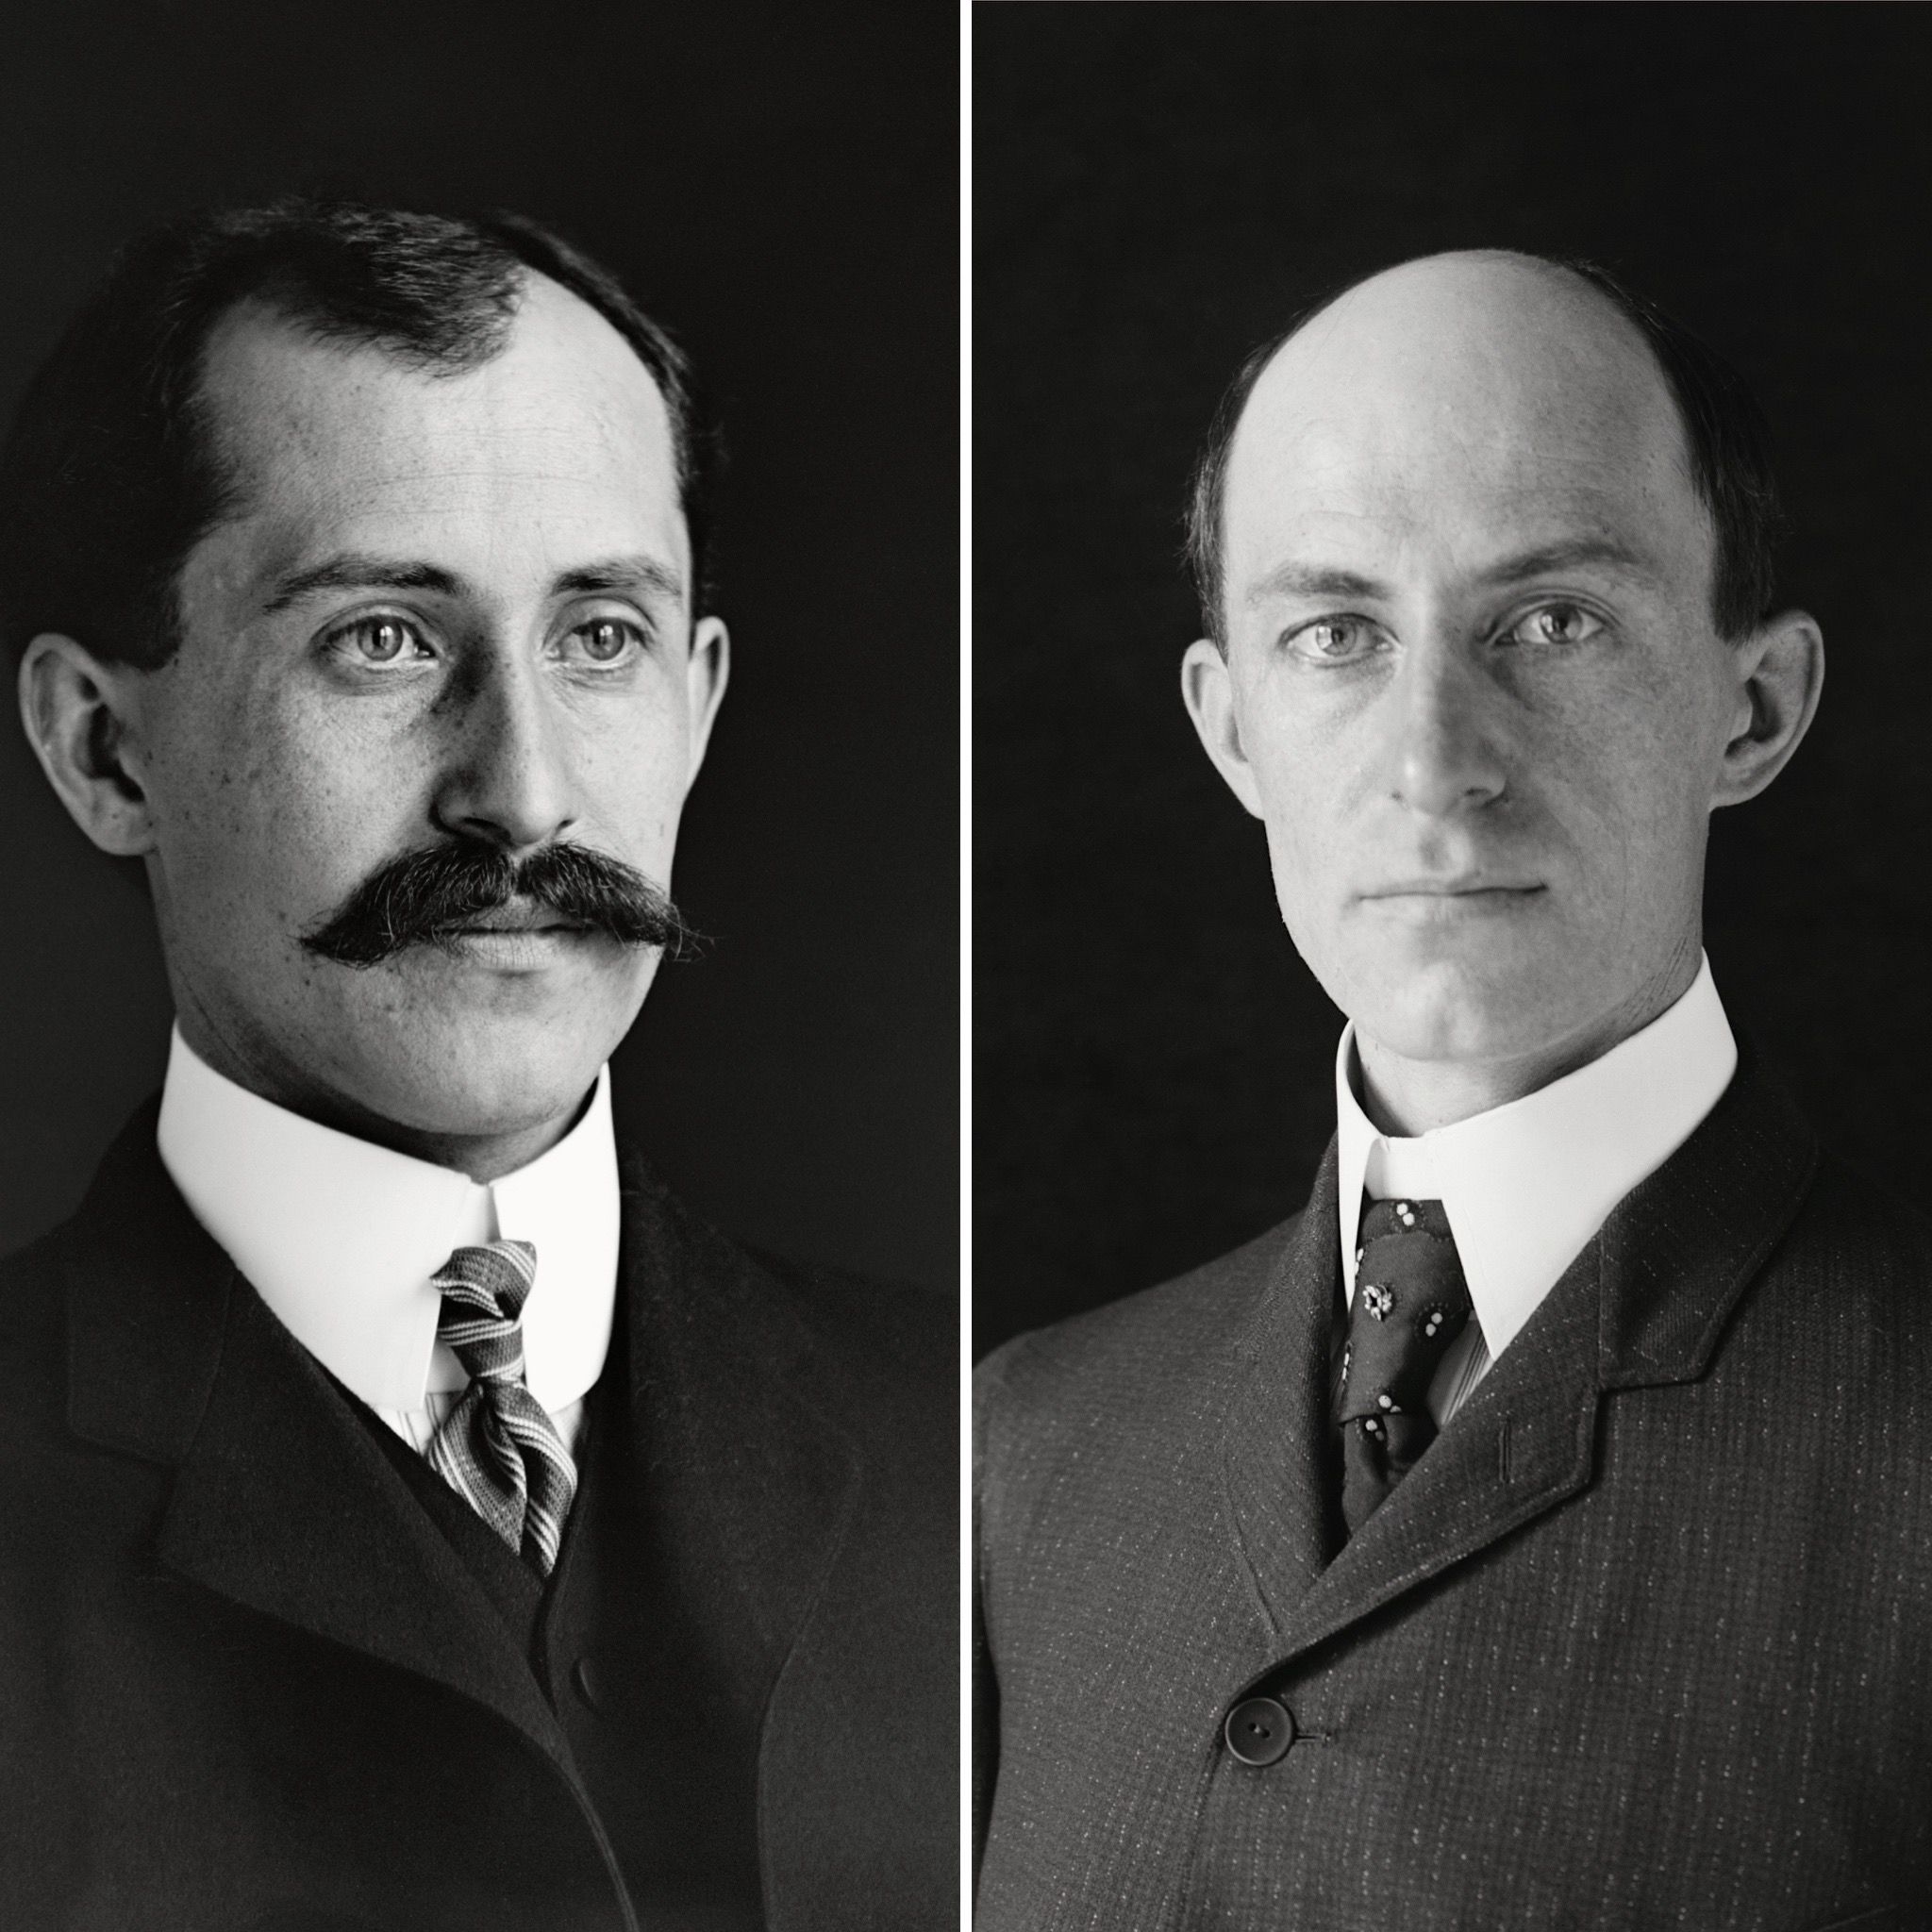 Orville and Wilbur Wright, referred to as the “Wright Brothers.”